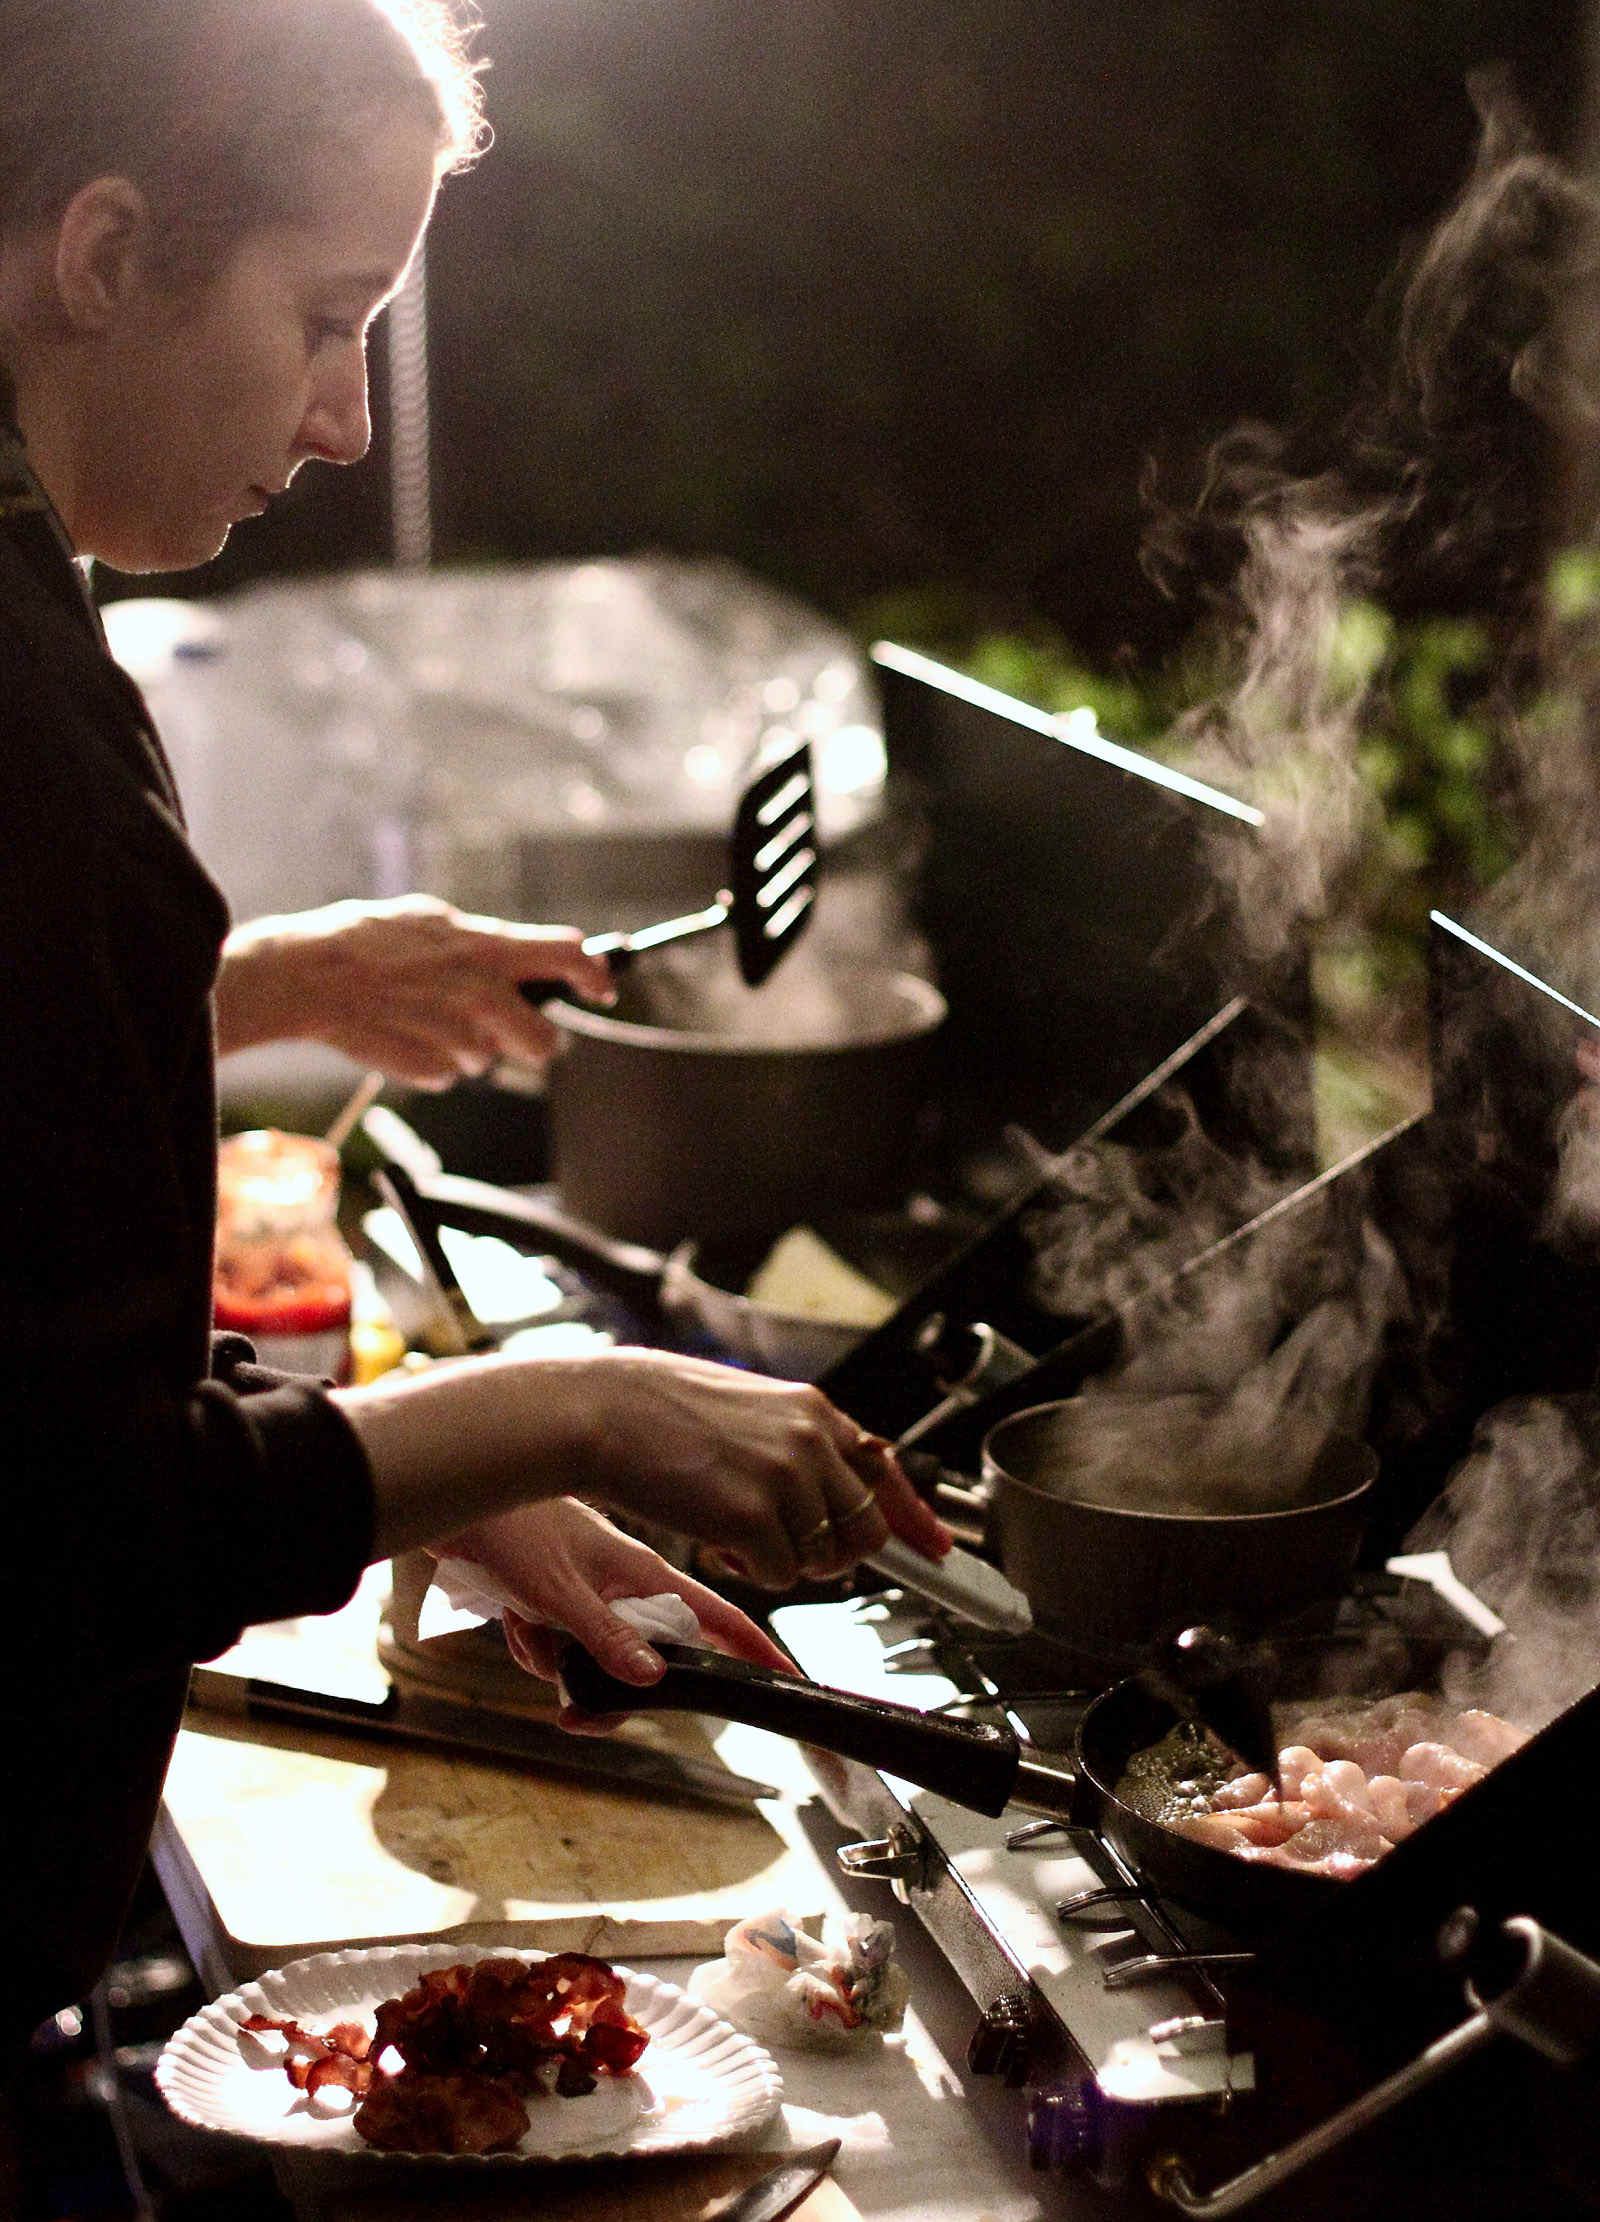 Volunteer Samantha Neakrase cooks breakfast at an aid station during the 2015 MMT 100